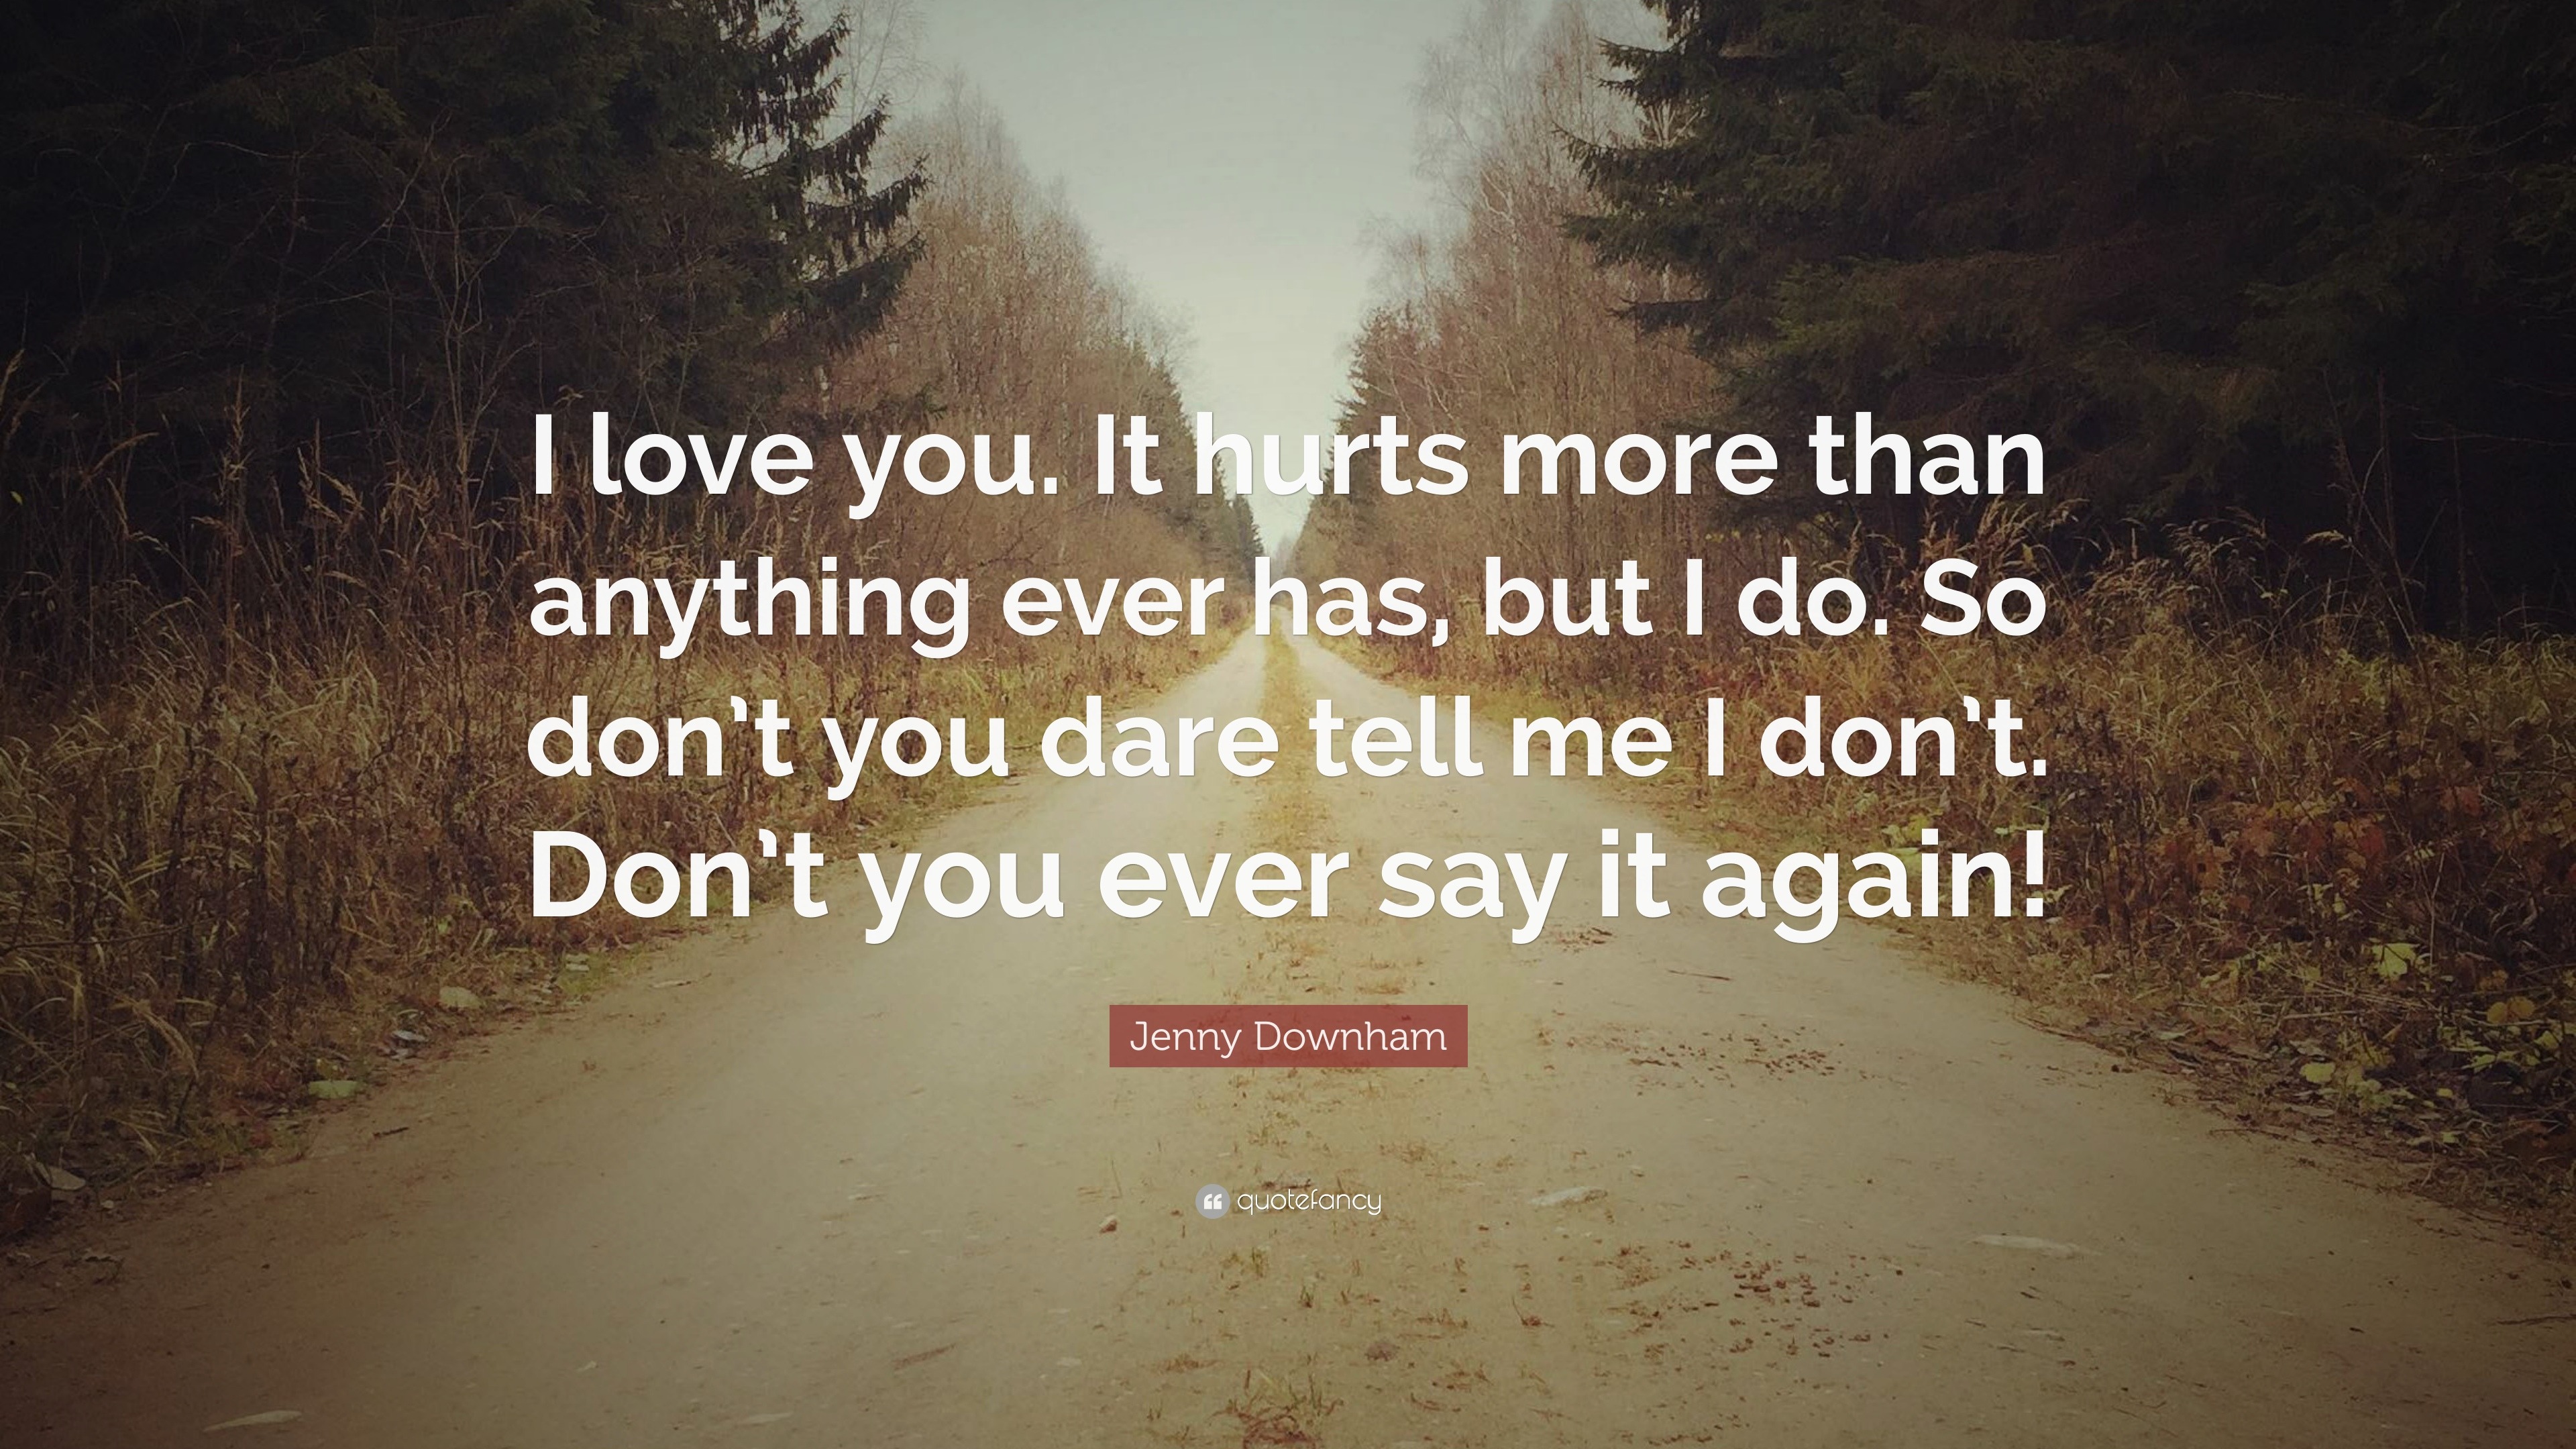 Jenny Downham Quote: “I love you. It hurts more than ...